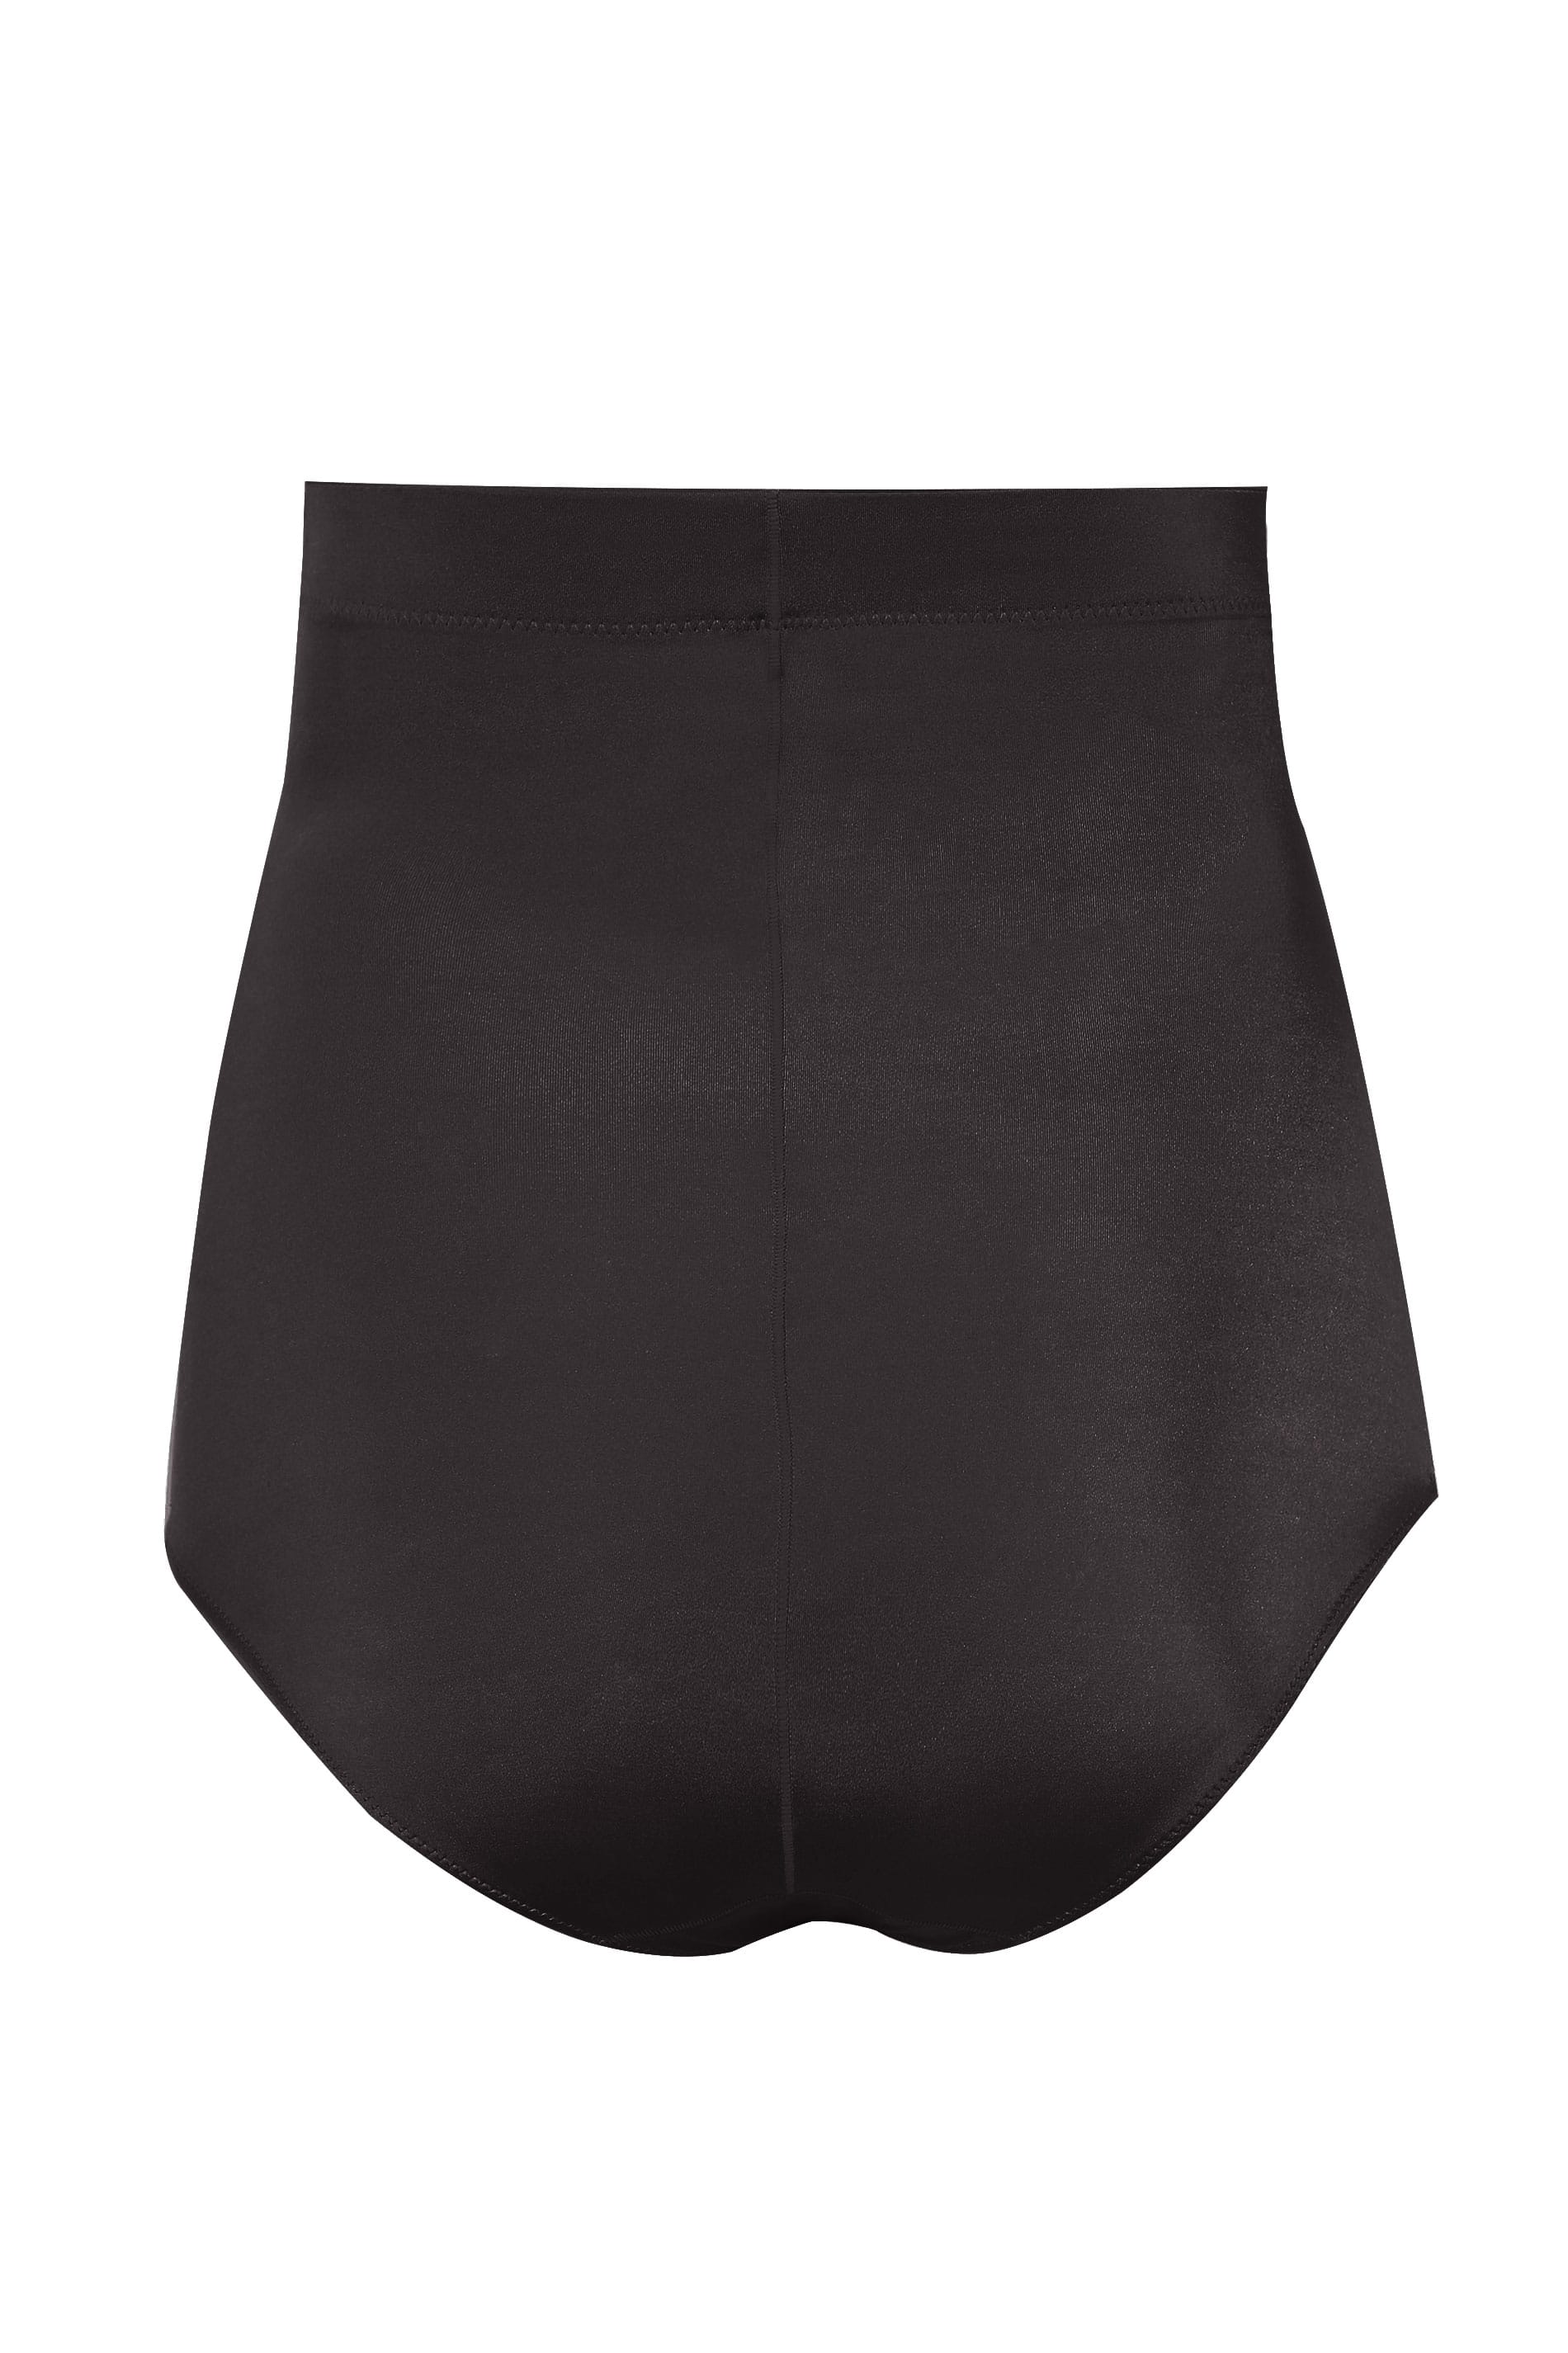 Truly Essential Black High-Waisted Brief Panty